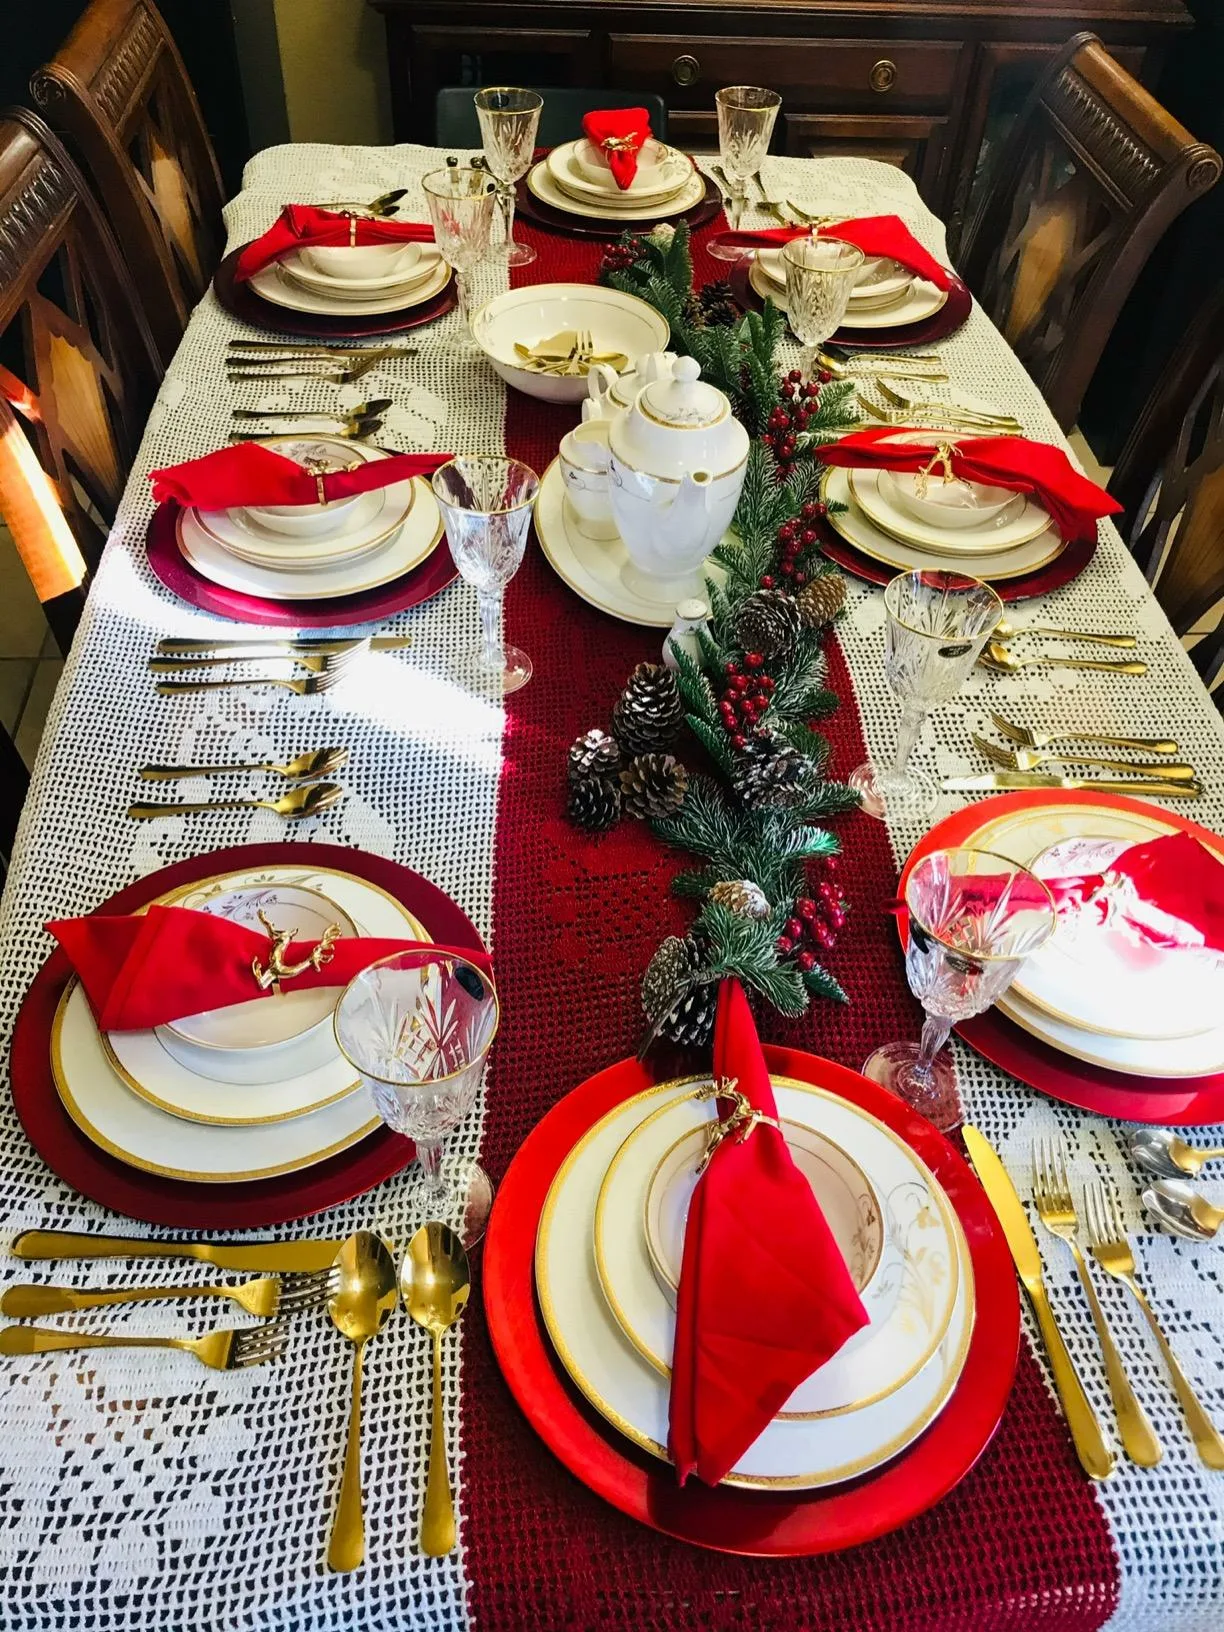 Green Garland Centerpiece Red Chargerpaltes See Through Tablecloth Christmas Dinner Table Decorations